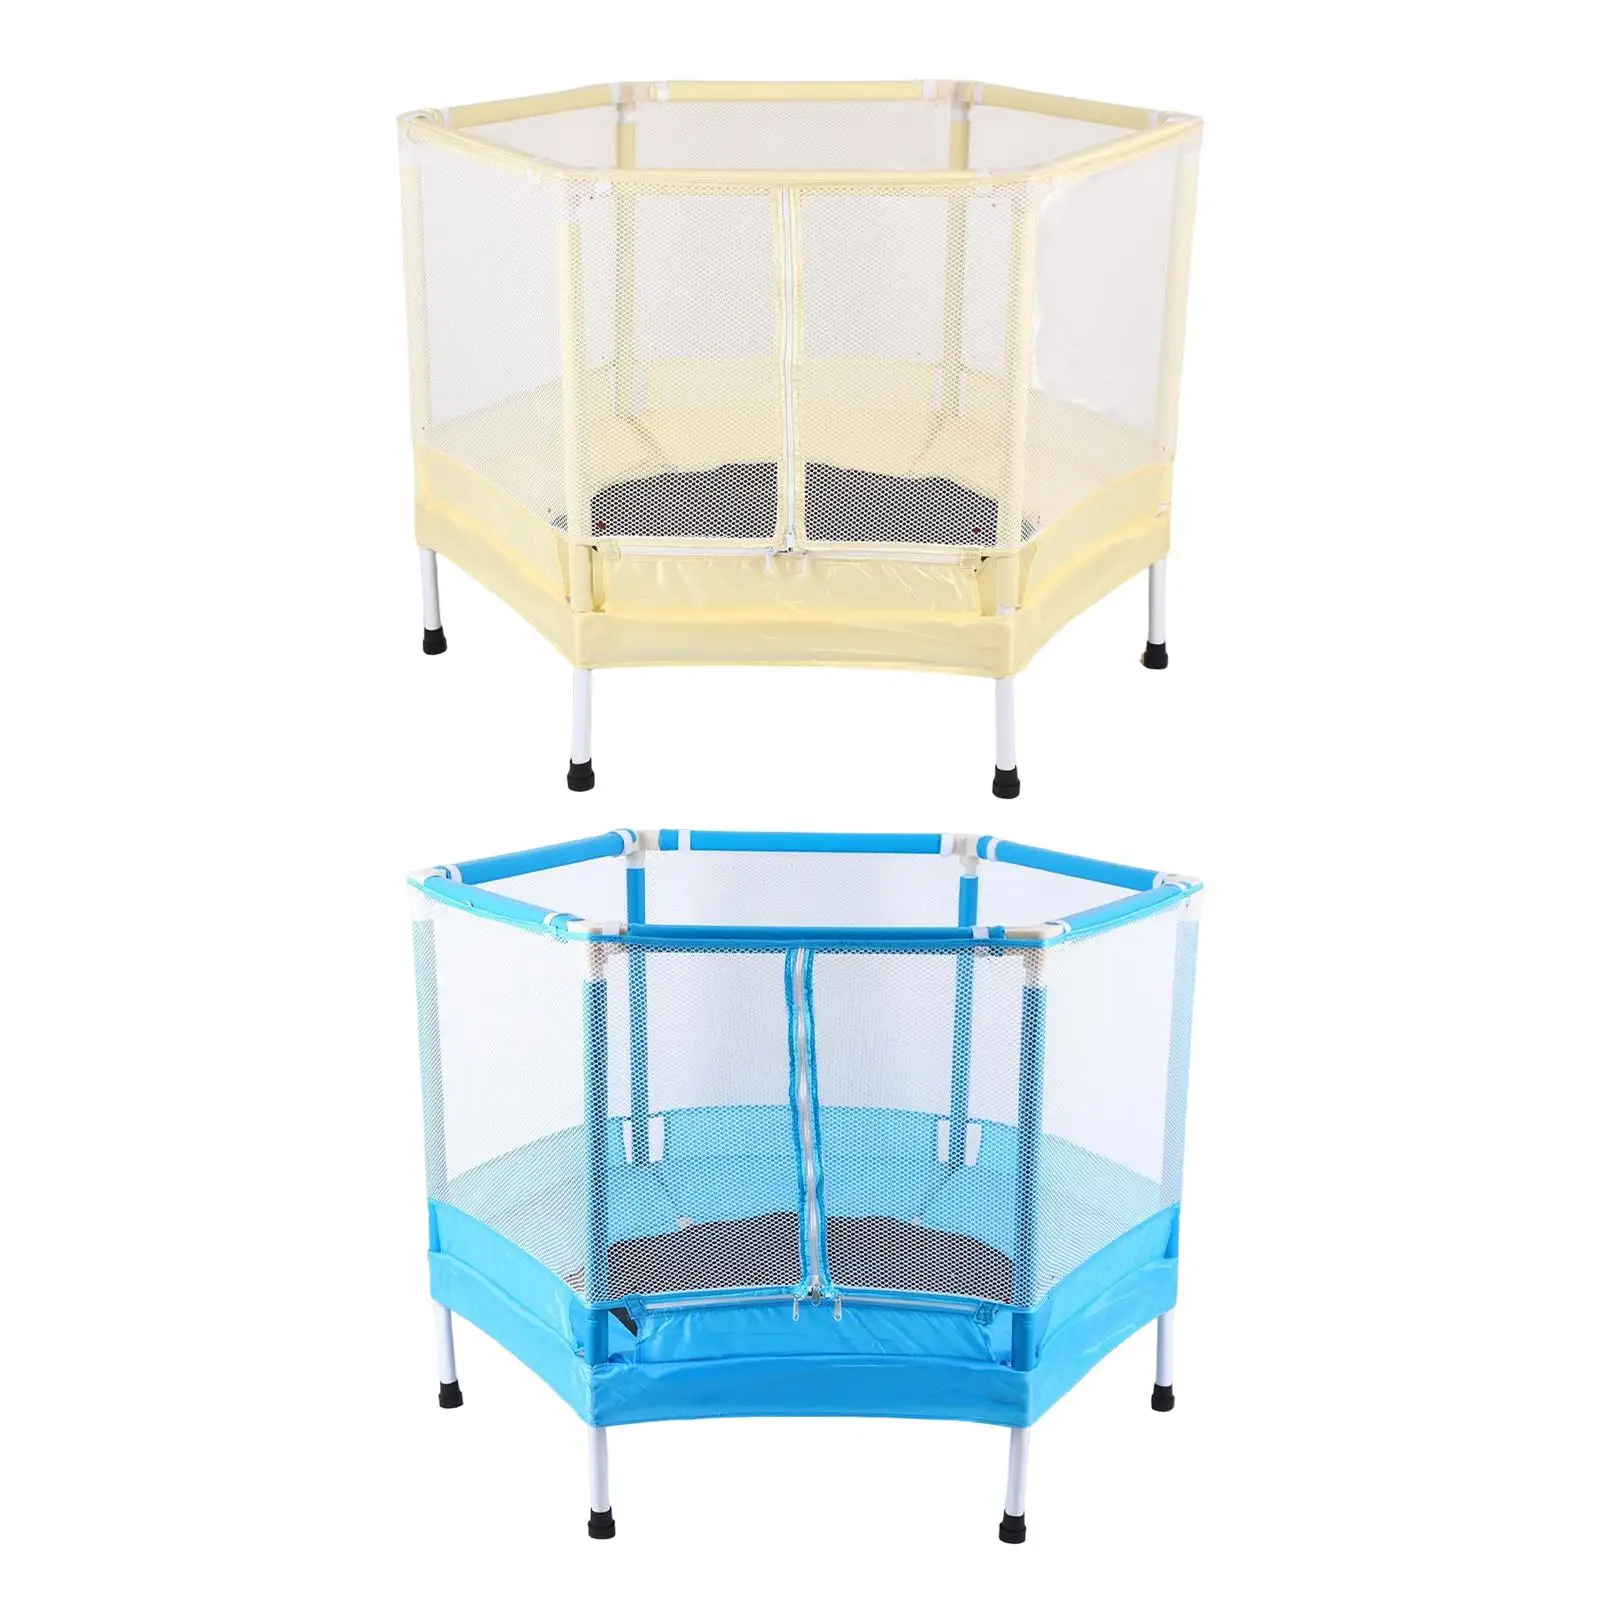 48inch Kids Trampoline with Enclosure Net Impact Resistant High Strength Springs Fitness Trampoline Leisure Trampoline Durable